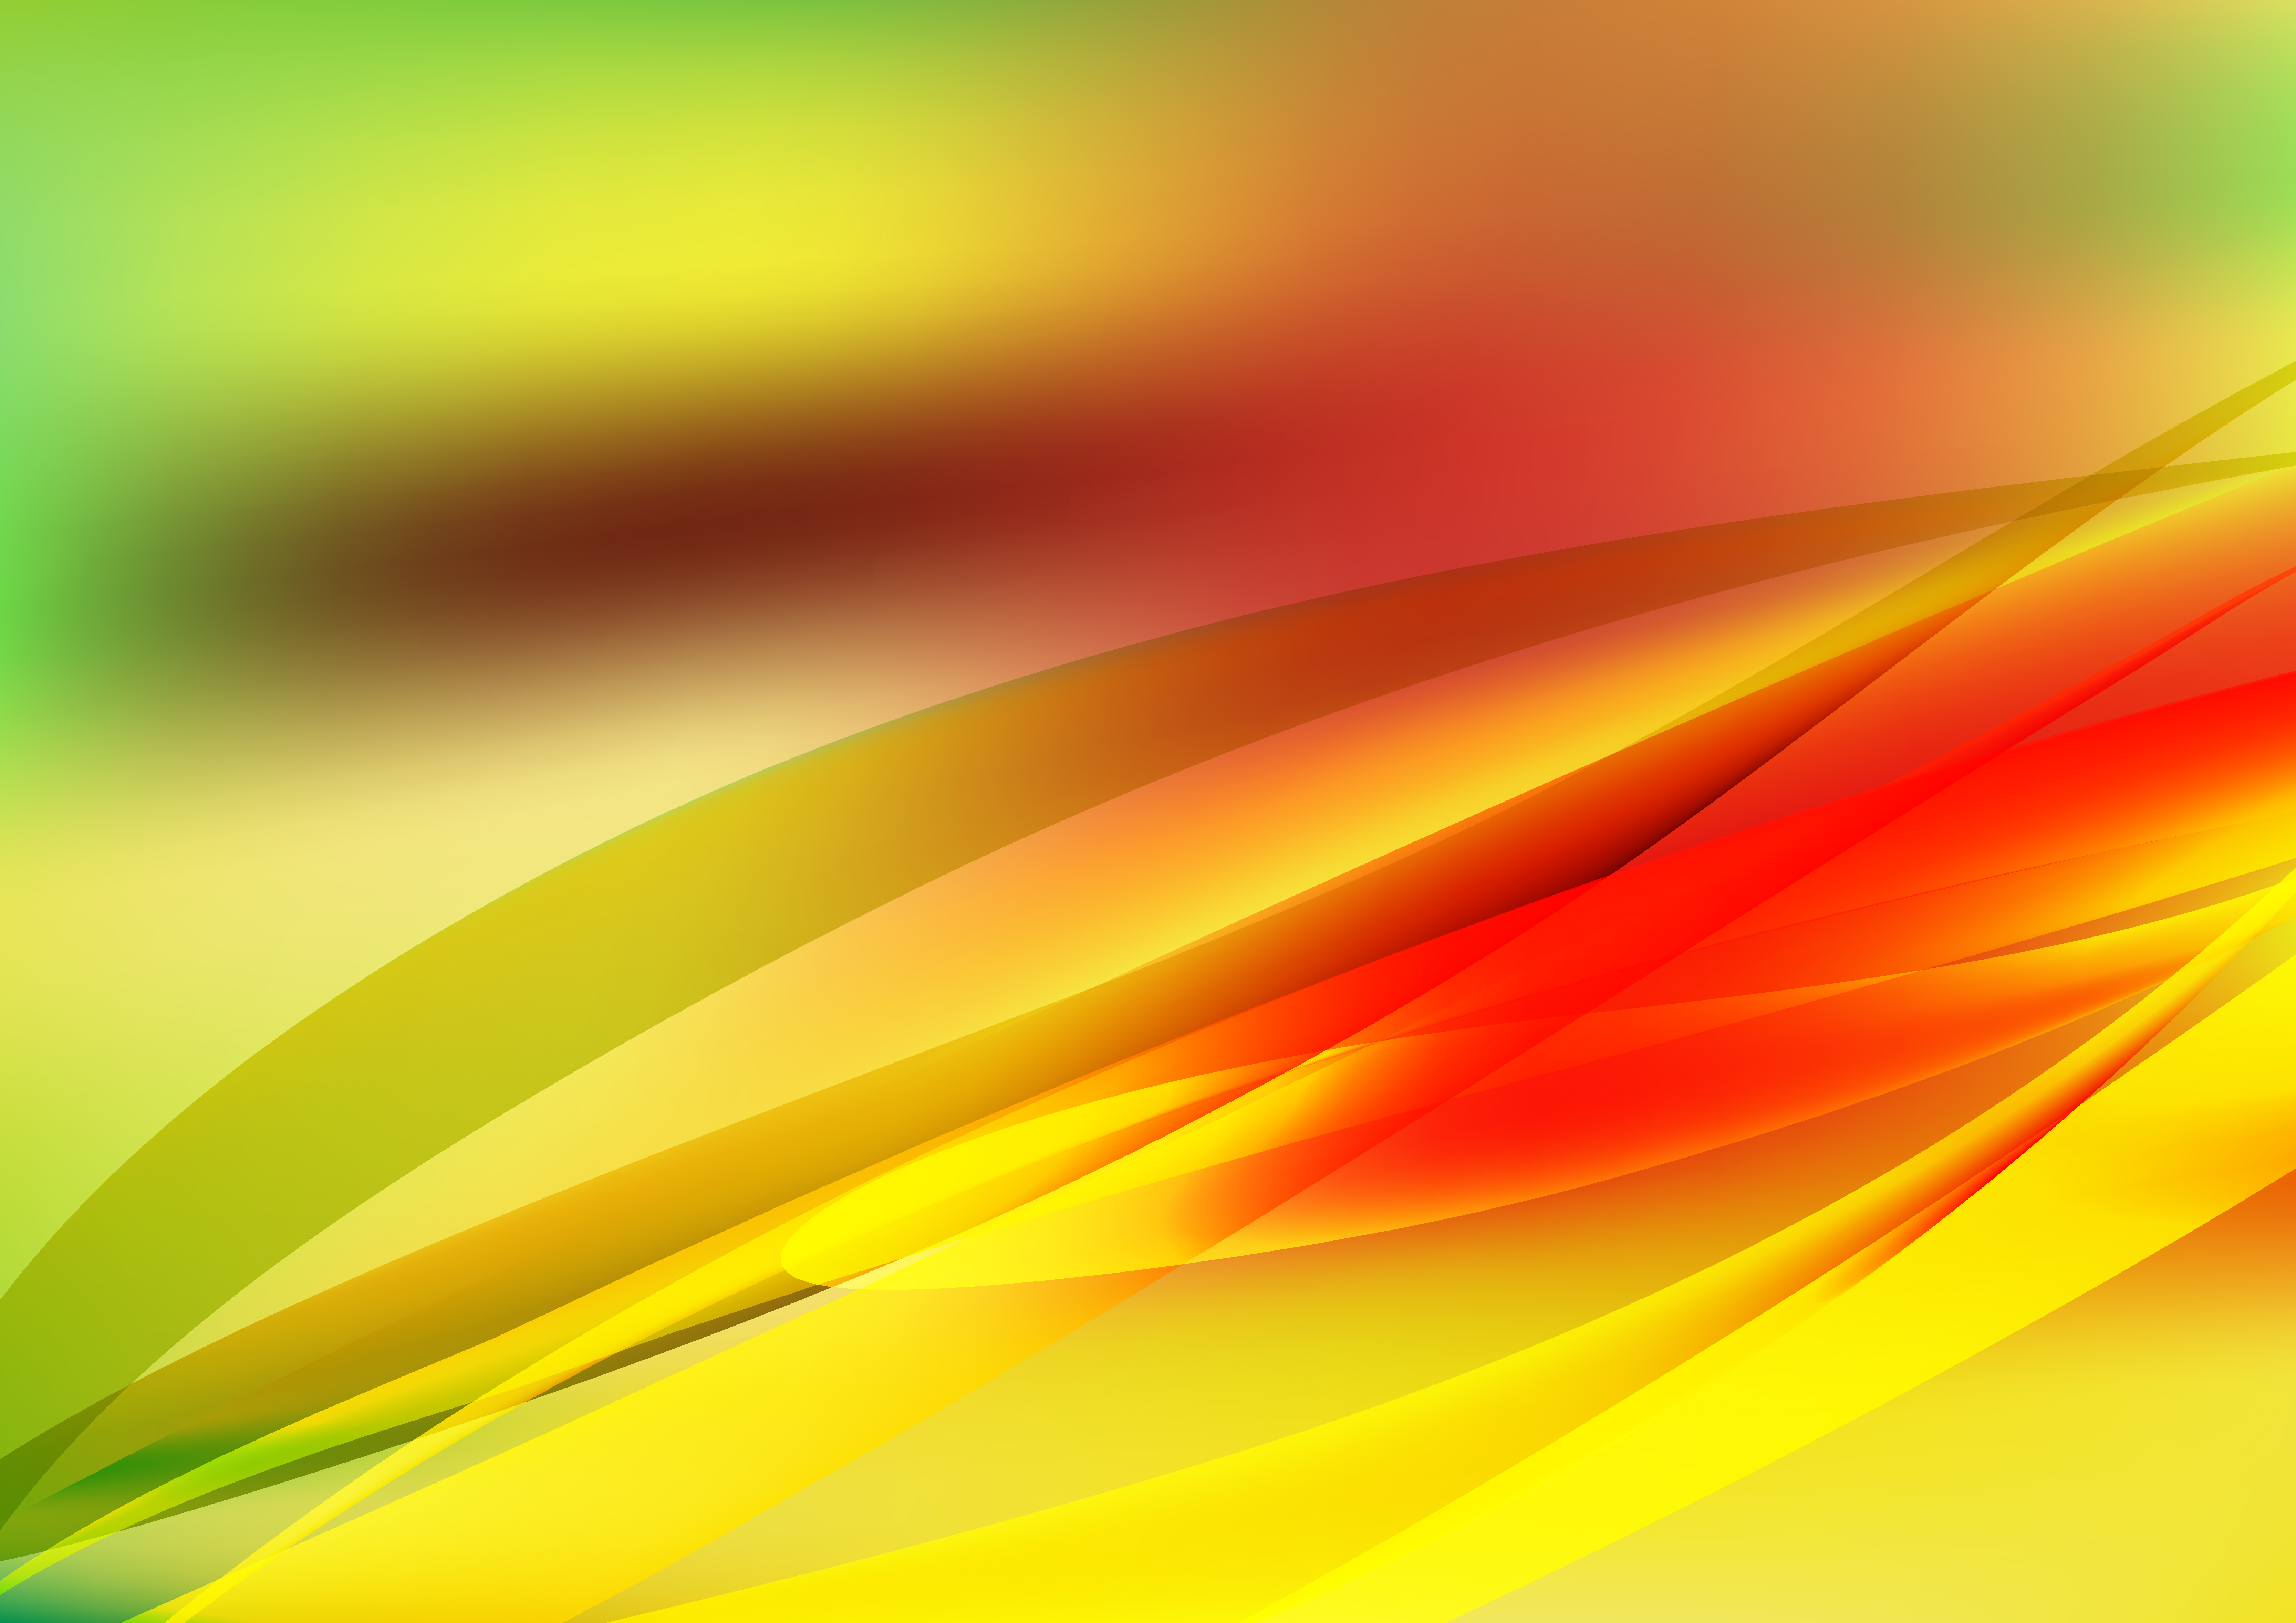 Free Abstract Shiny Red Yellow and Green Wave Background